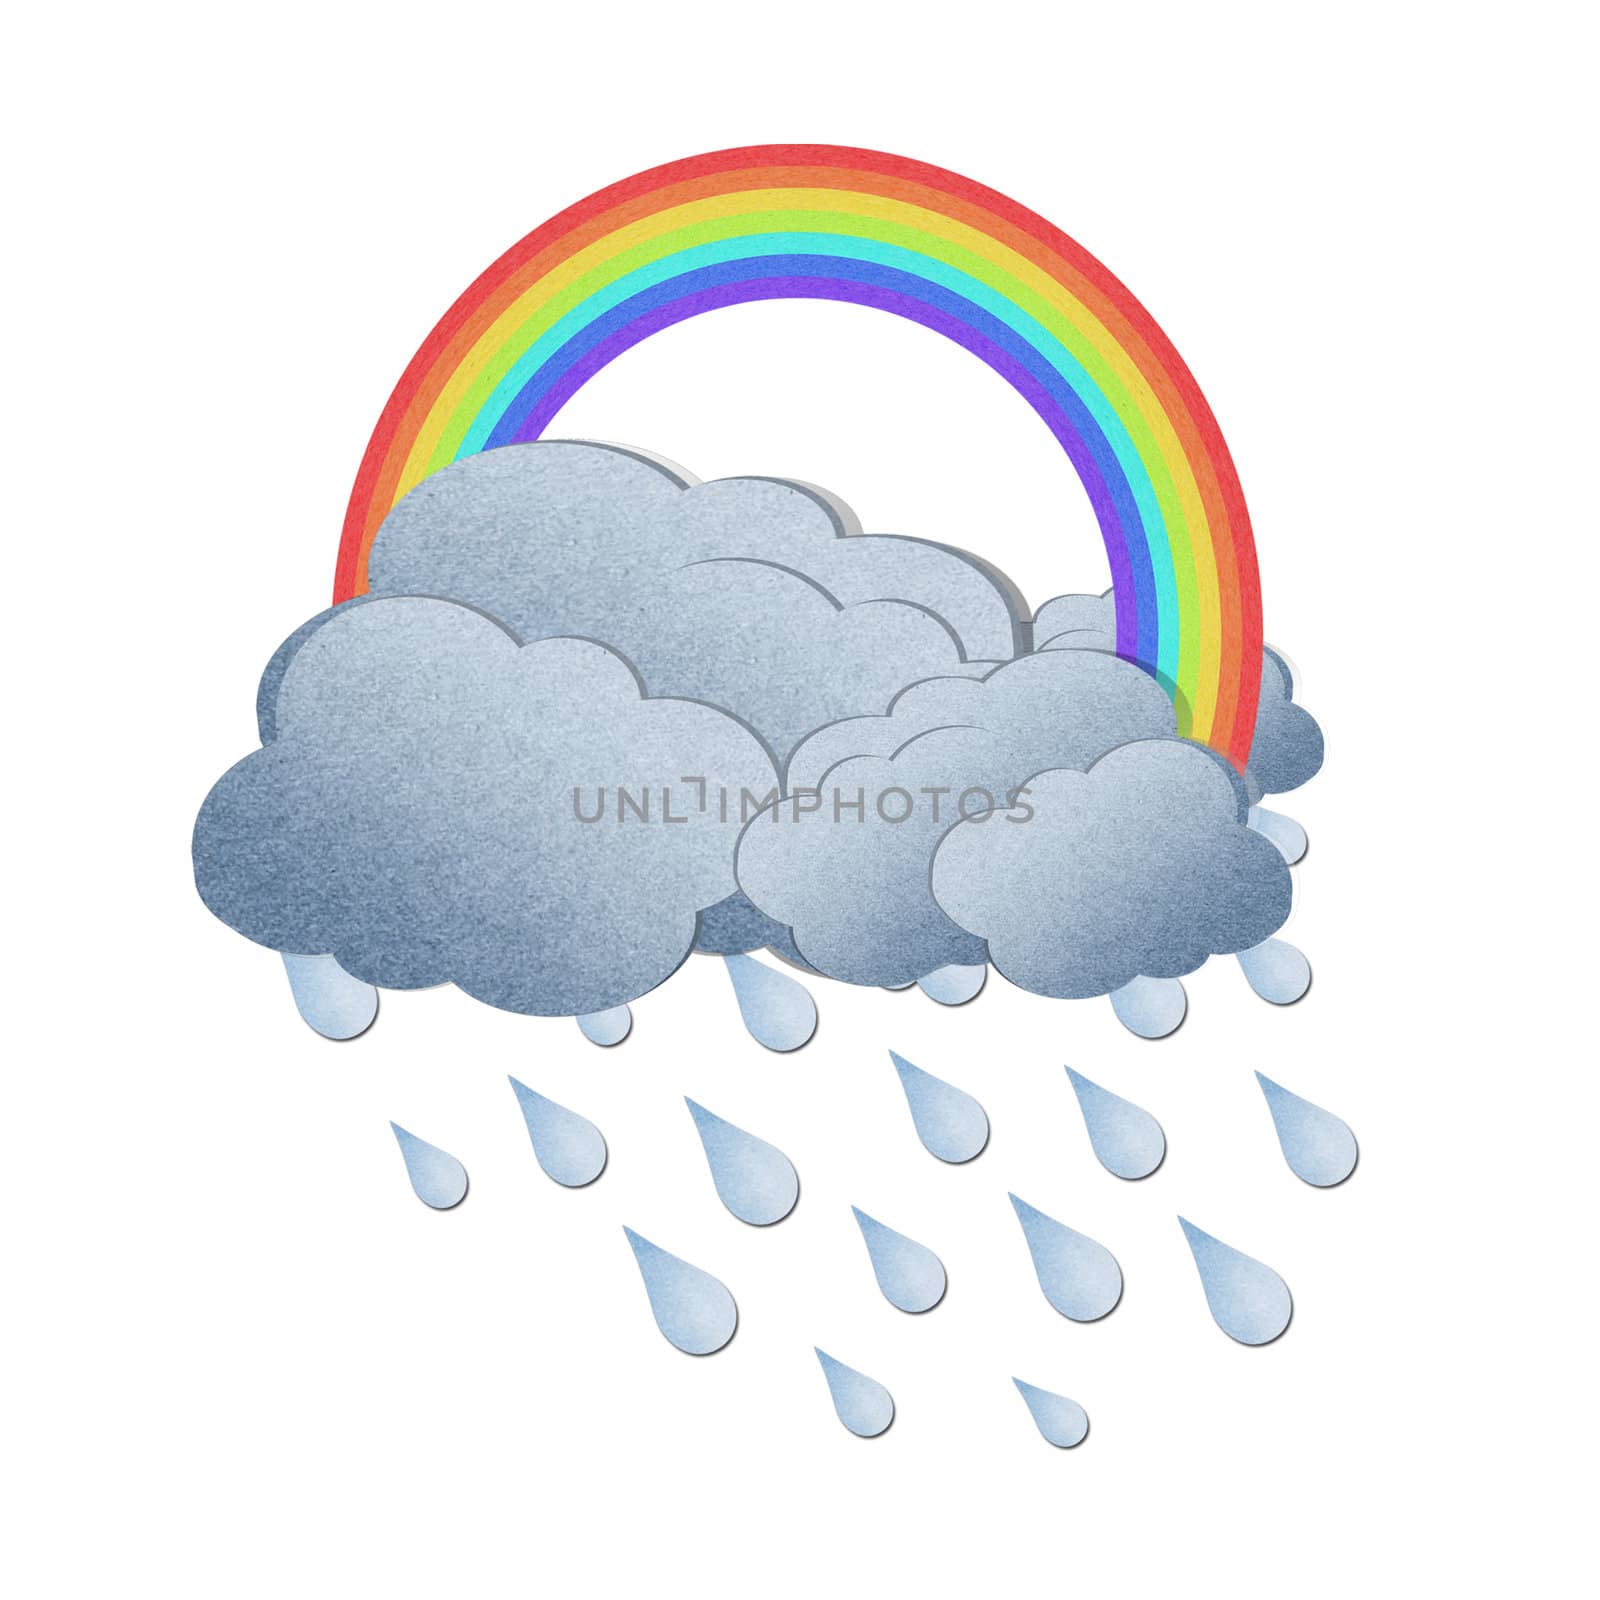  Grunge recycled paper rainbow with rain on white background by jakgree